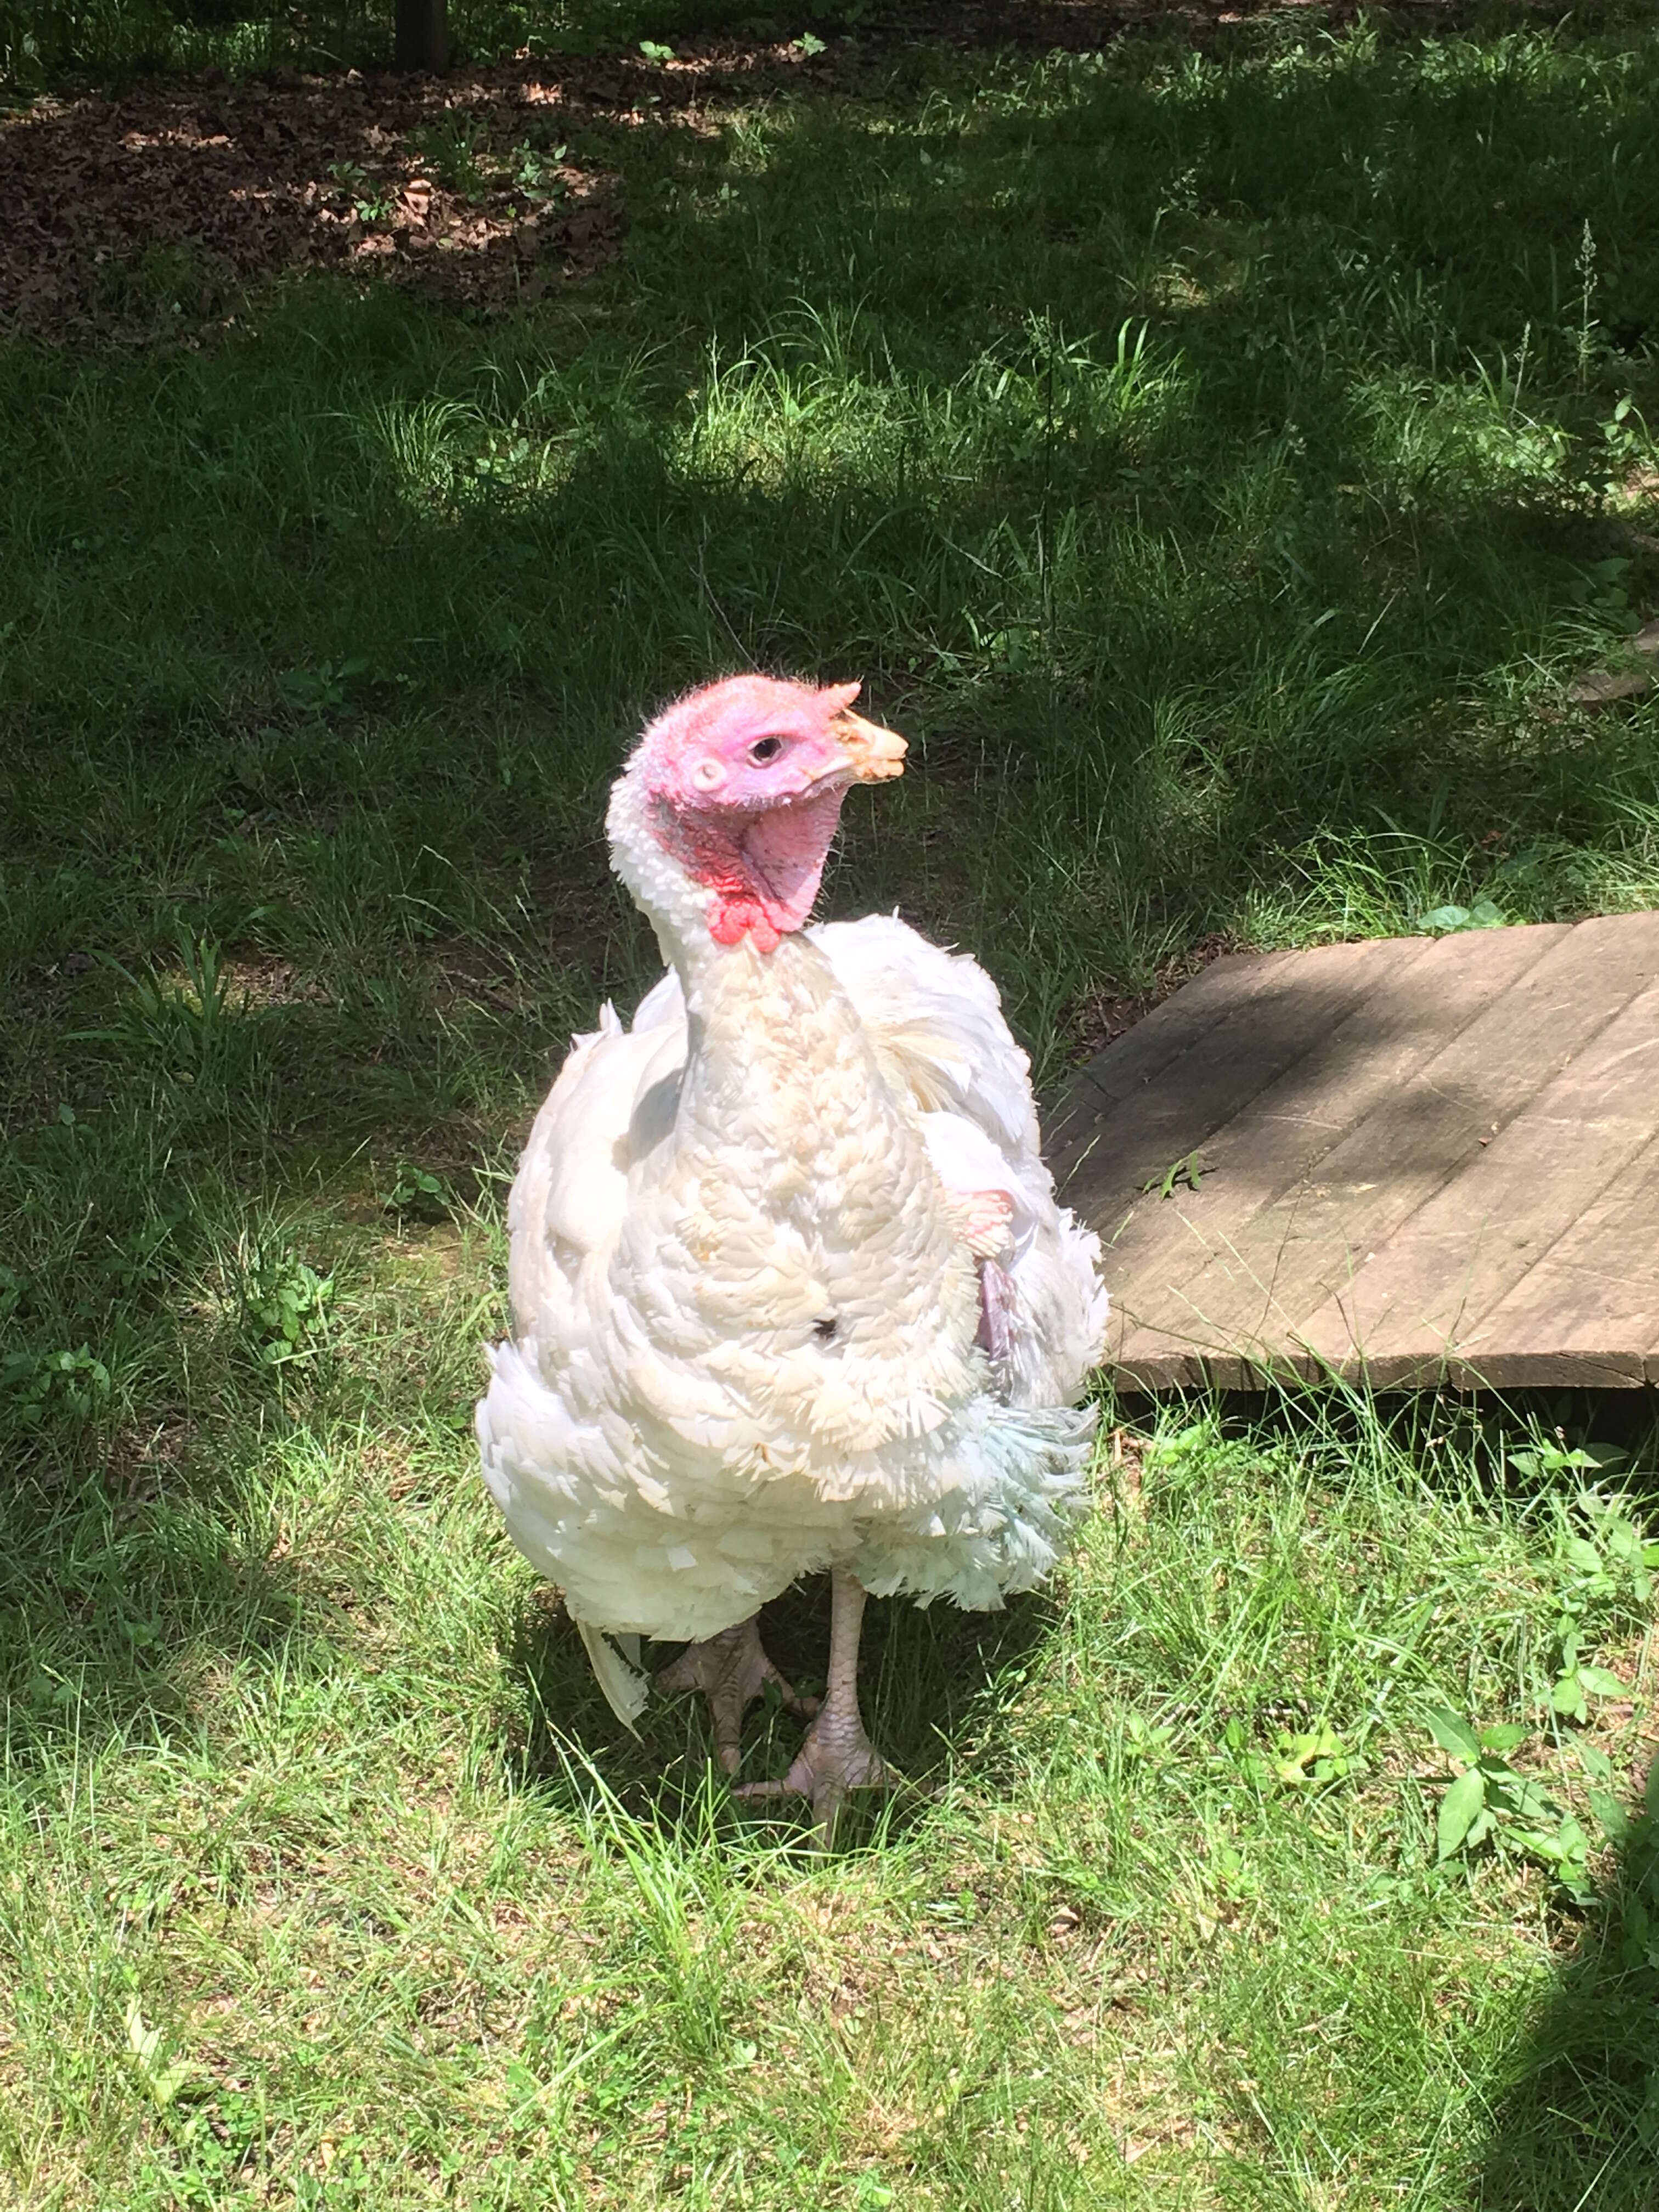 Ivan the turkey who fell from a slaughterhouse truck in Maryland